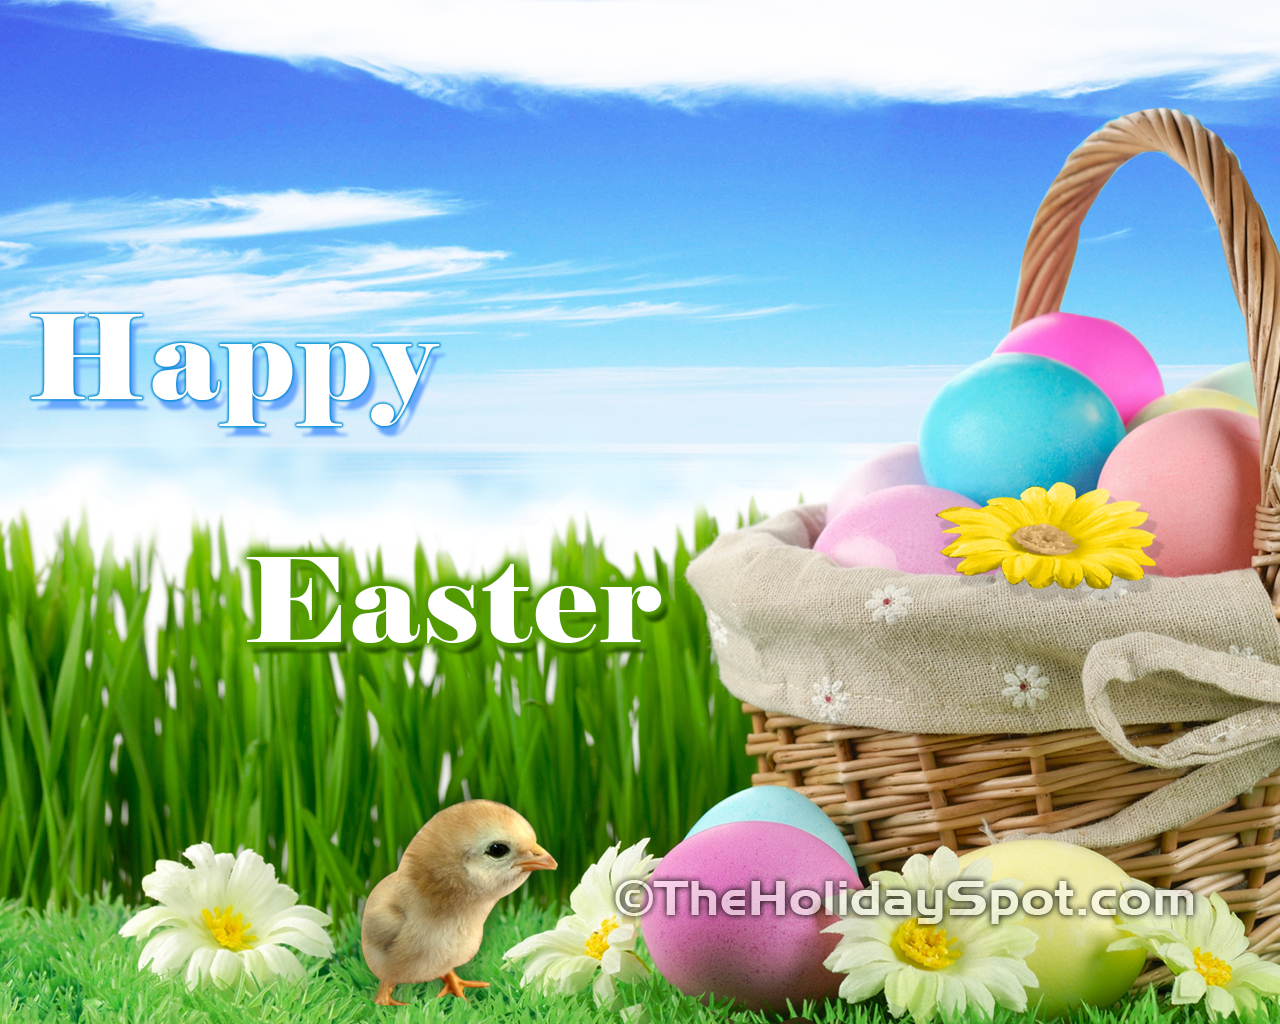 Free Easter Screensavers and Wallpaper